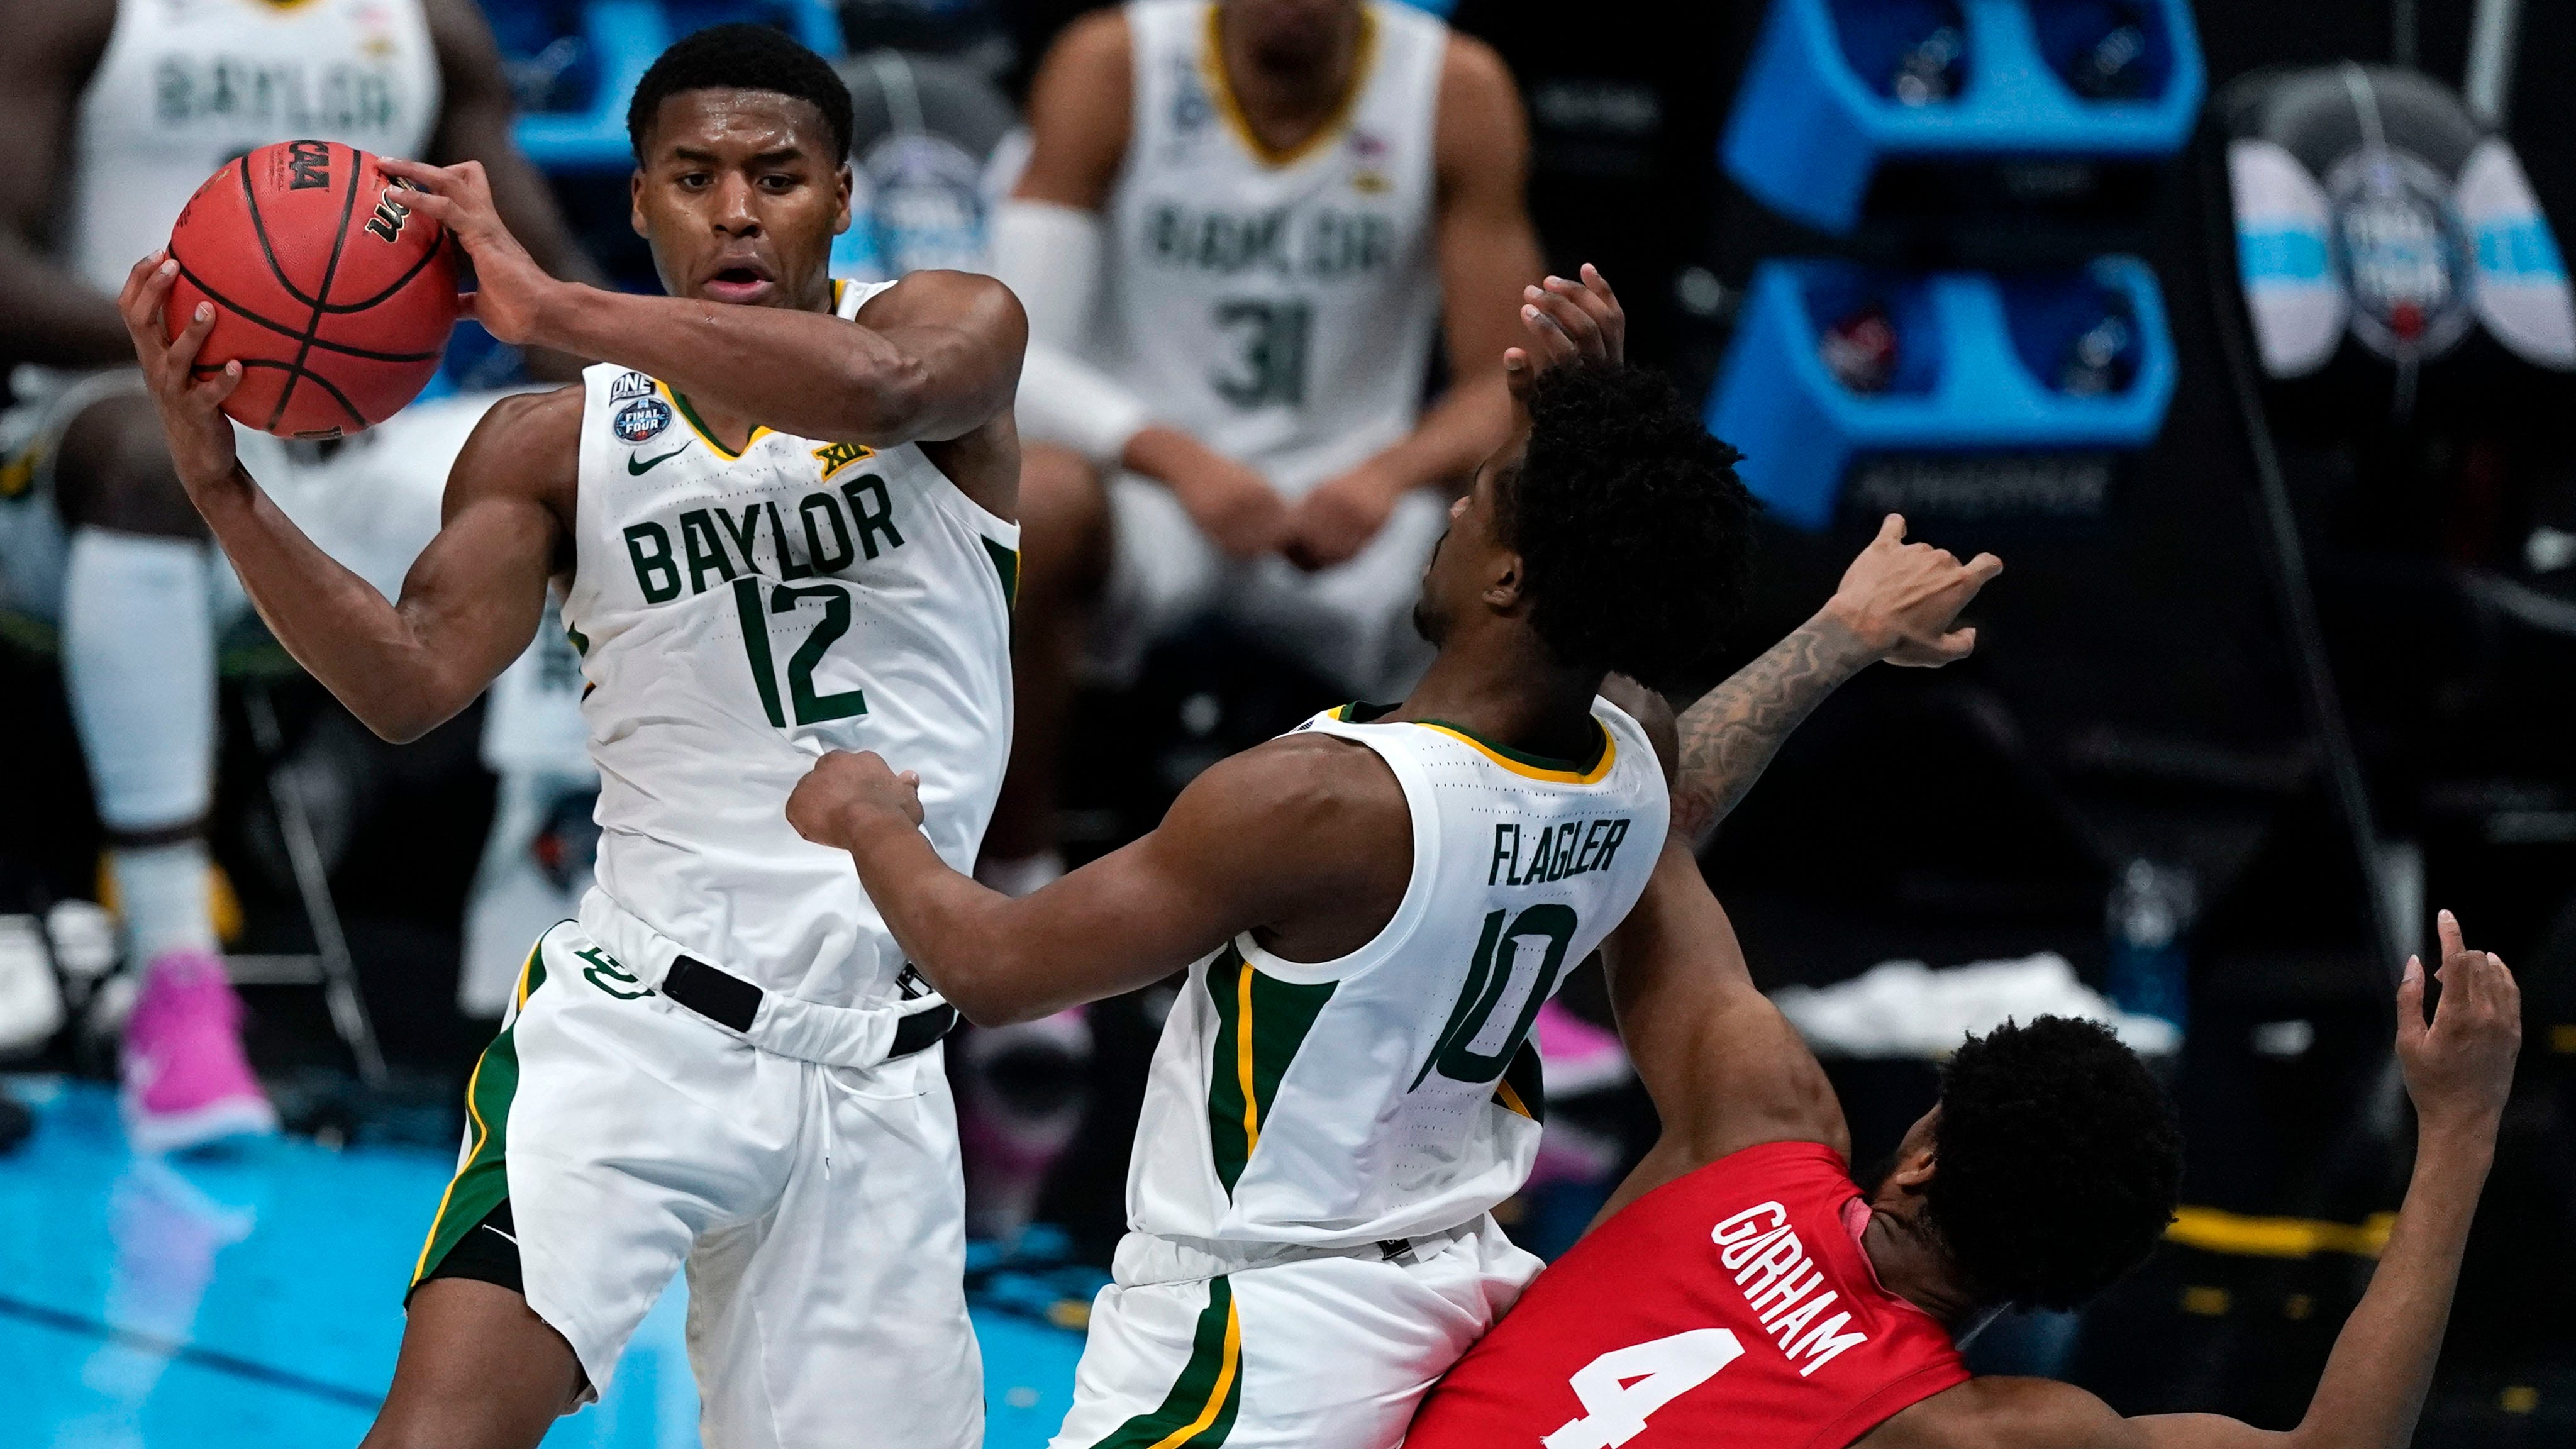 Baylor defeats Houston in Final Four to advance to the NCAA Tournament championship game